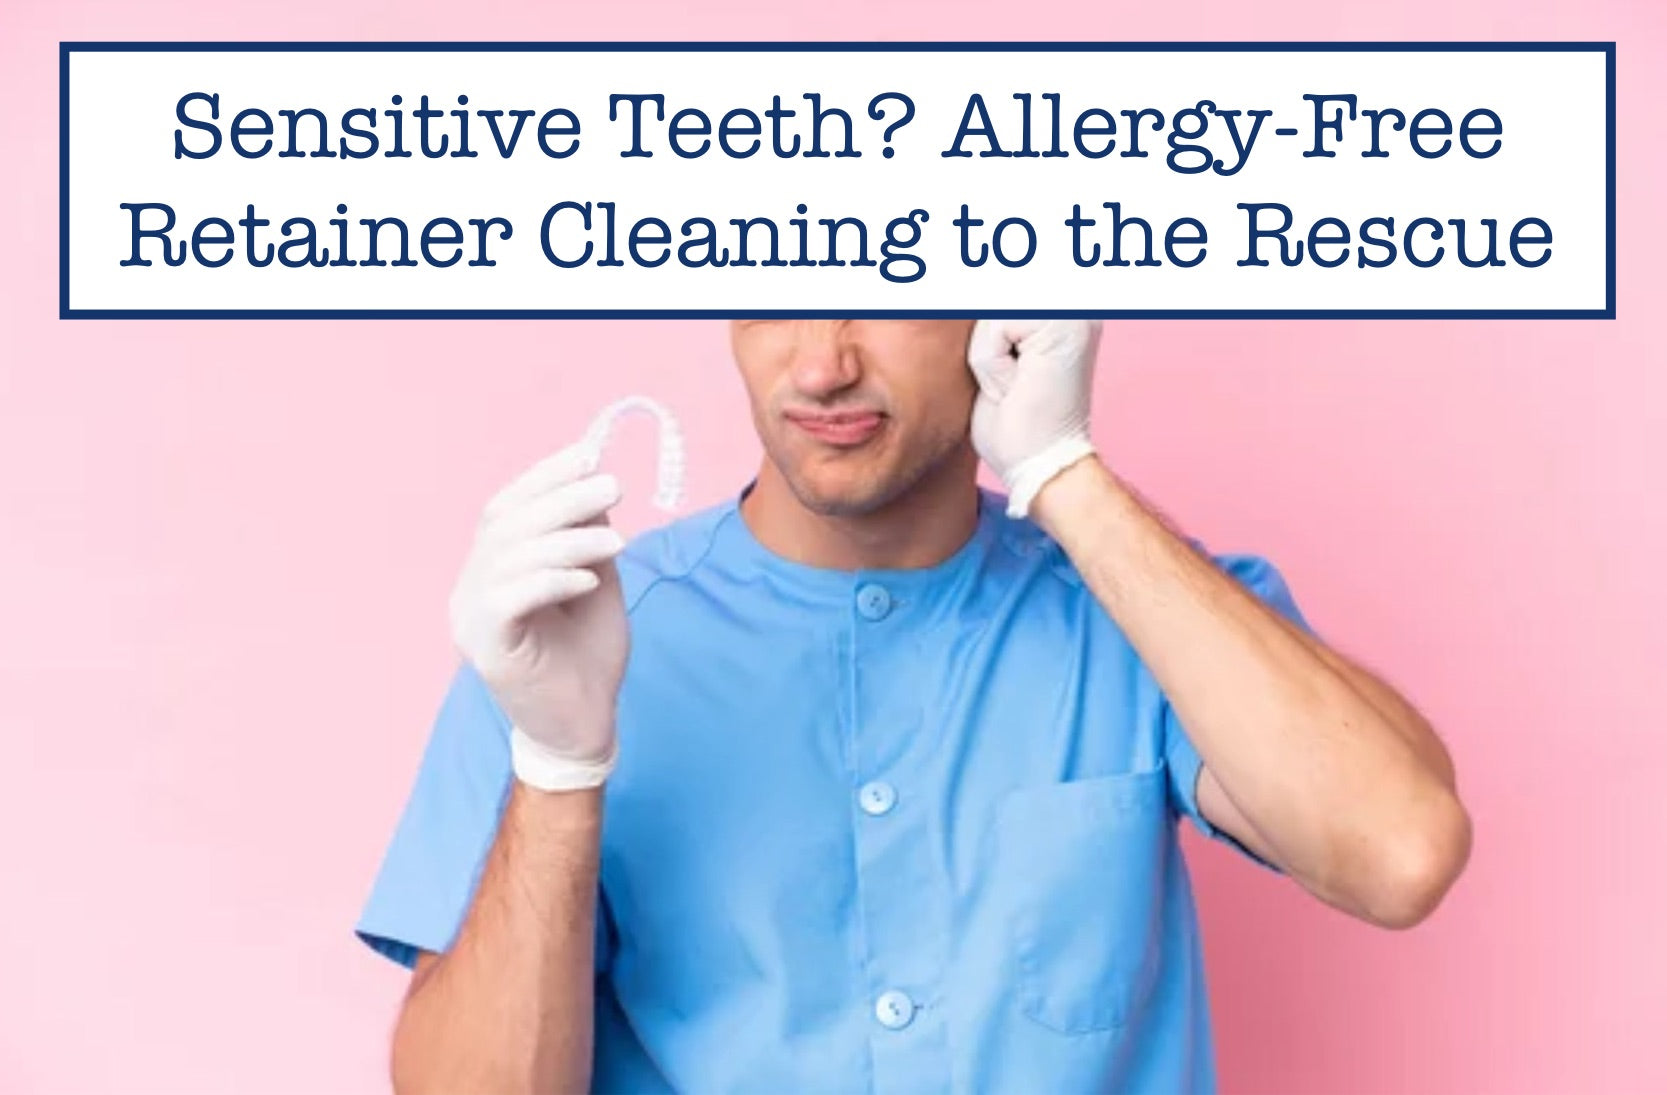 Sensitive Teeth? Allergy-Free Retainer Cleaning to the Rescue